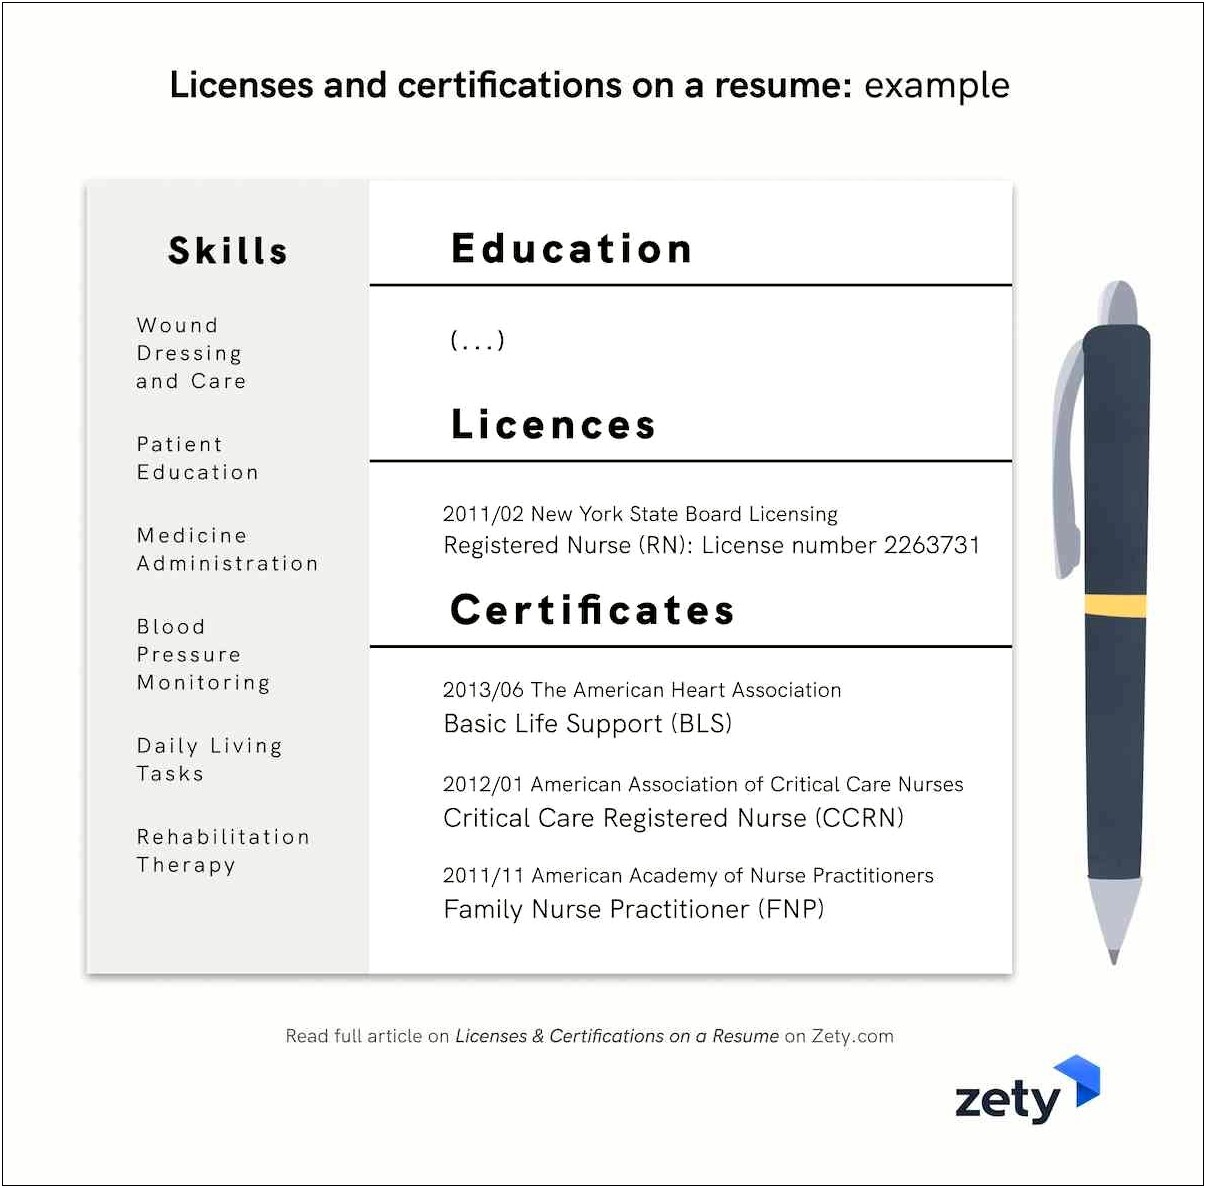 Online Management Certificates Look Good On A Resume